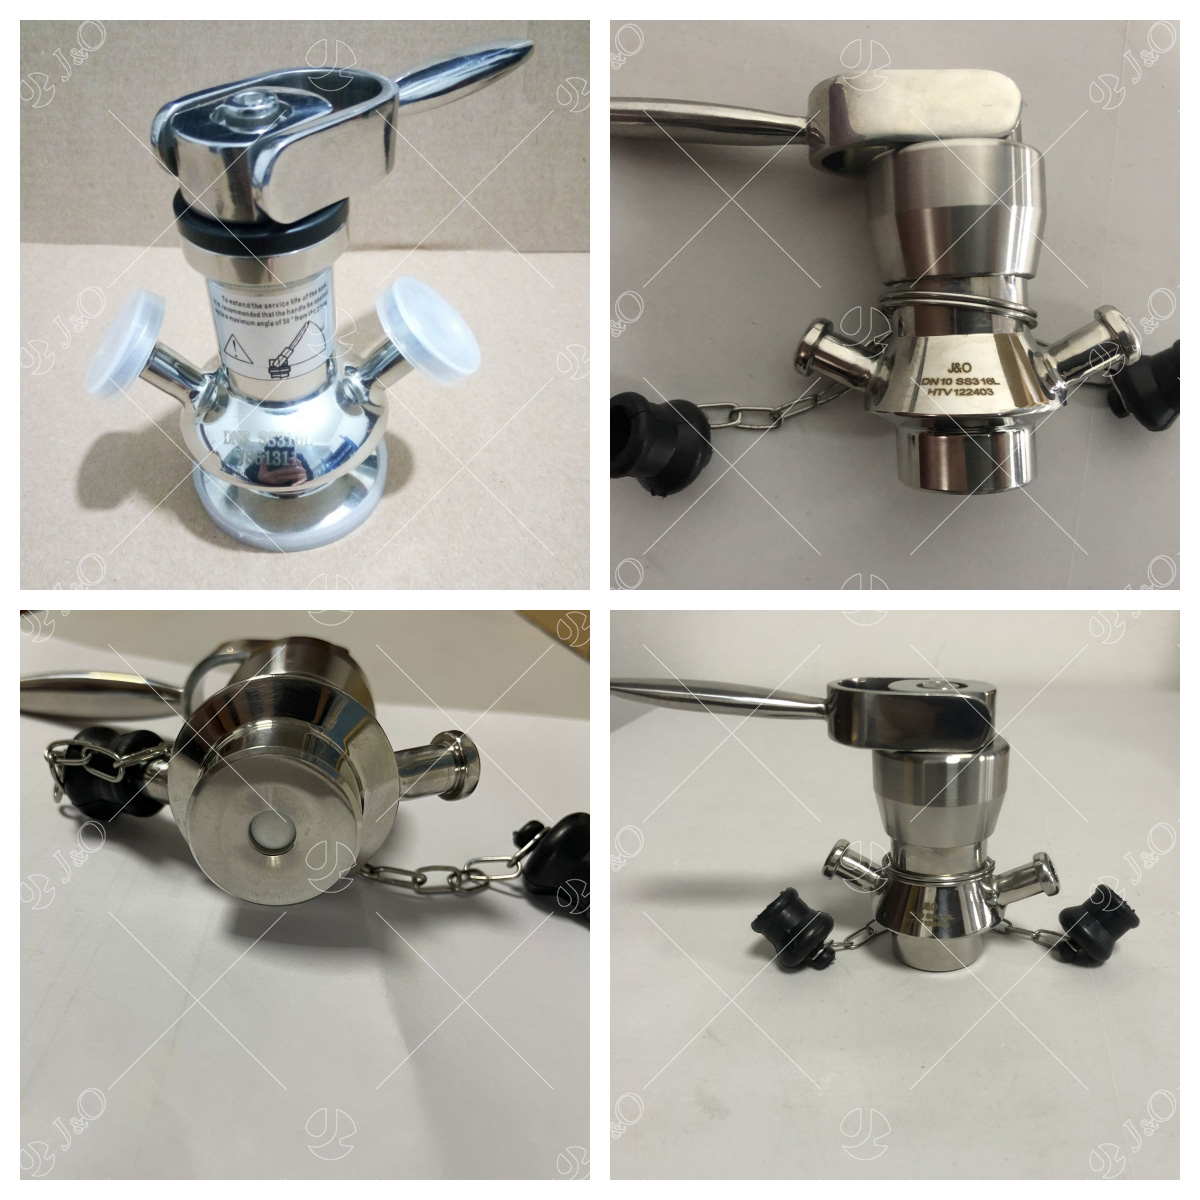 Hygienic Stainless Steel Tri Clamp Manual Sampling Valve With SS Handle